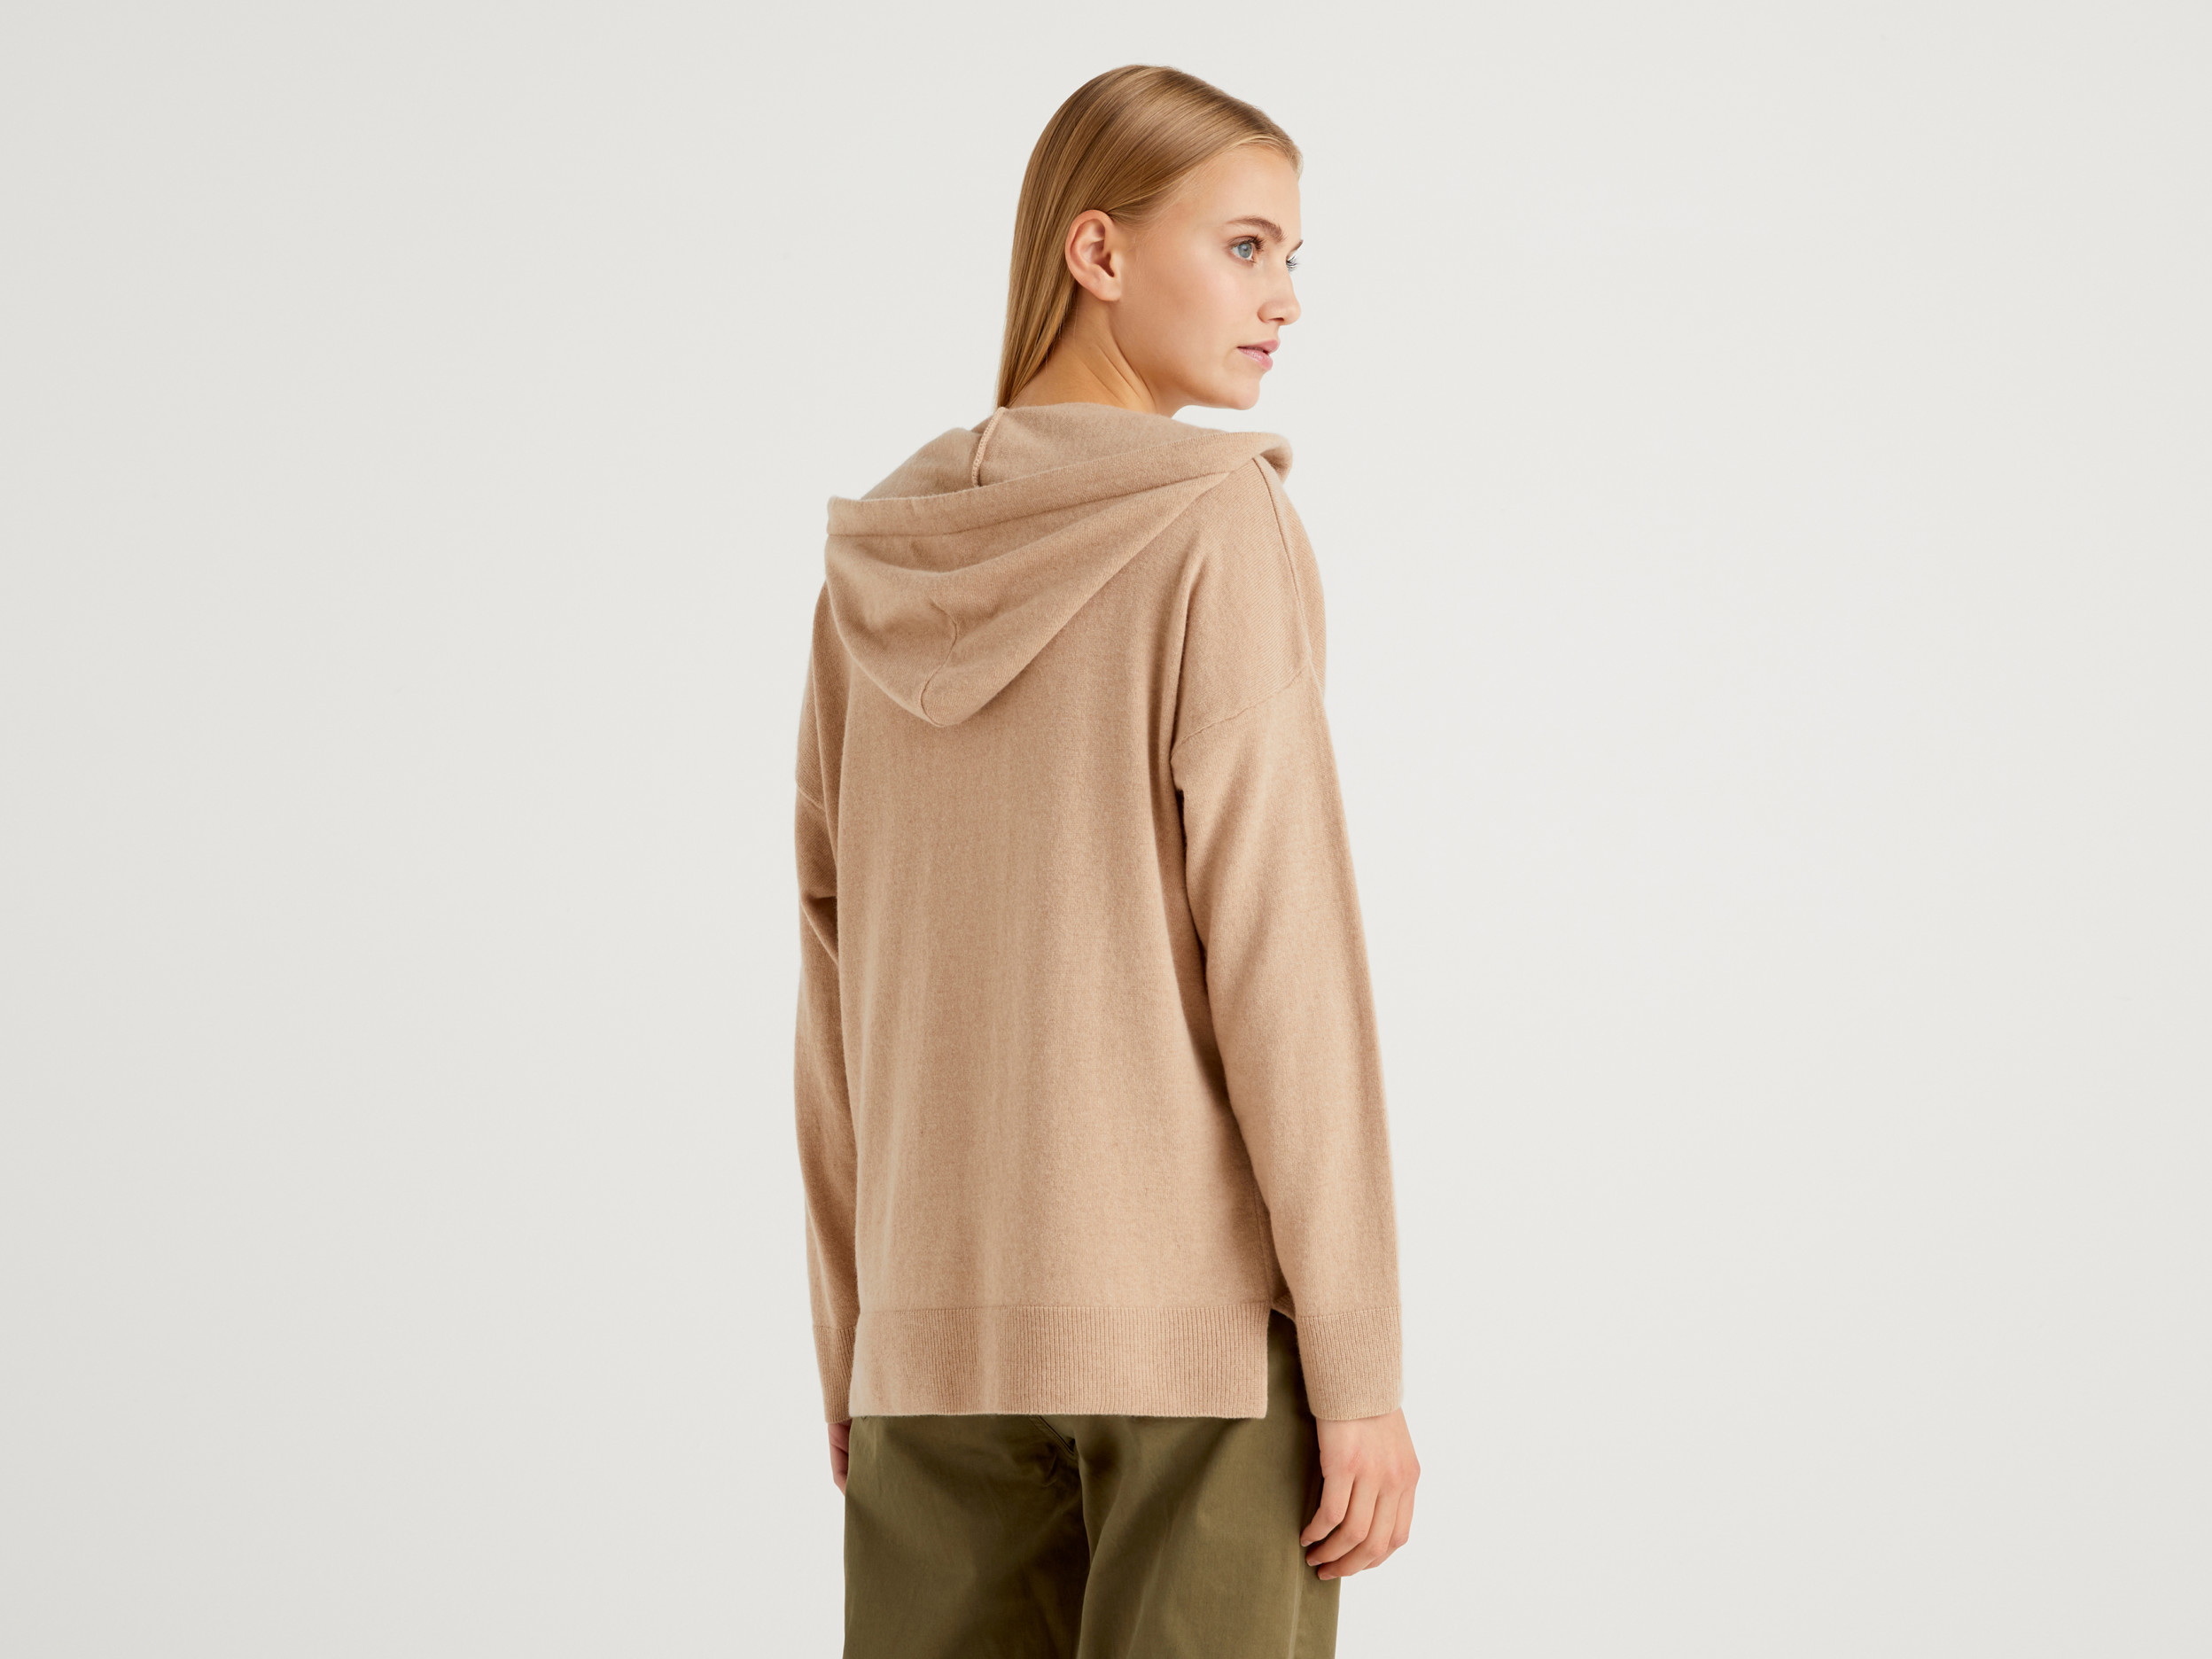 Benetton, Camel Sweater In Cashmere Blend With Hood, Taglia L, Camel, Women